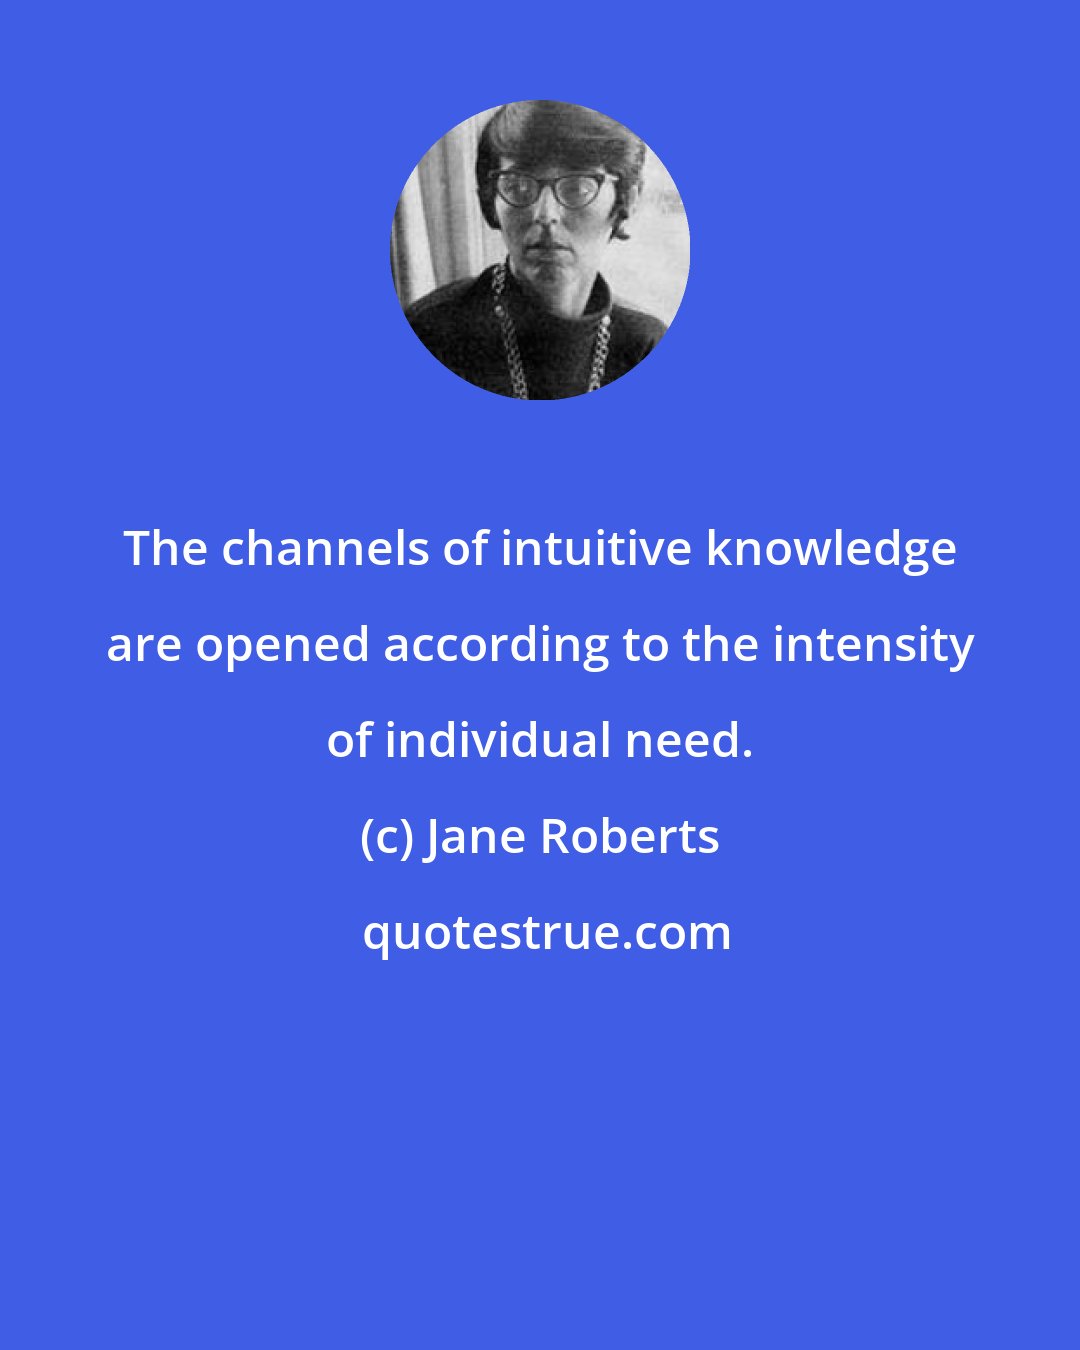 Jane Roberts: The channels of intuitive knowledge are opened according to the intensity of individual need.